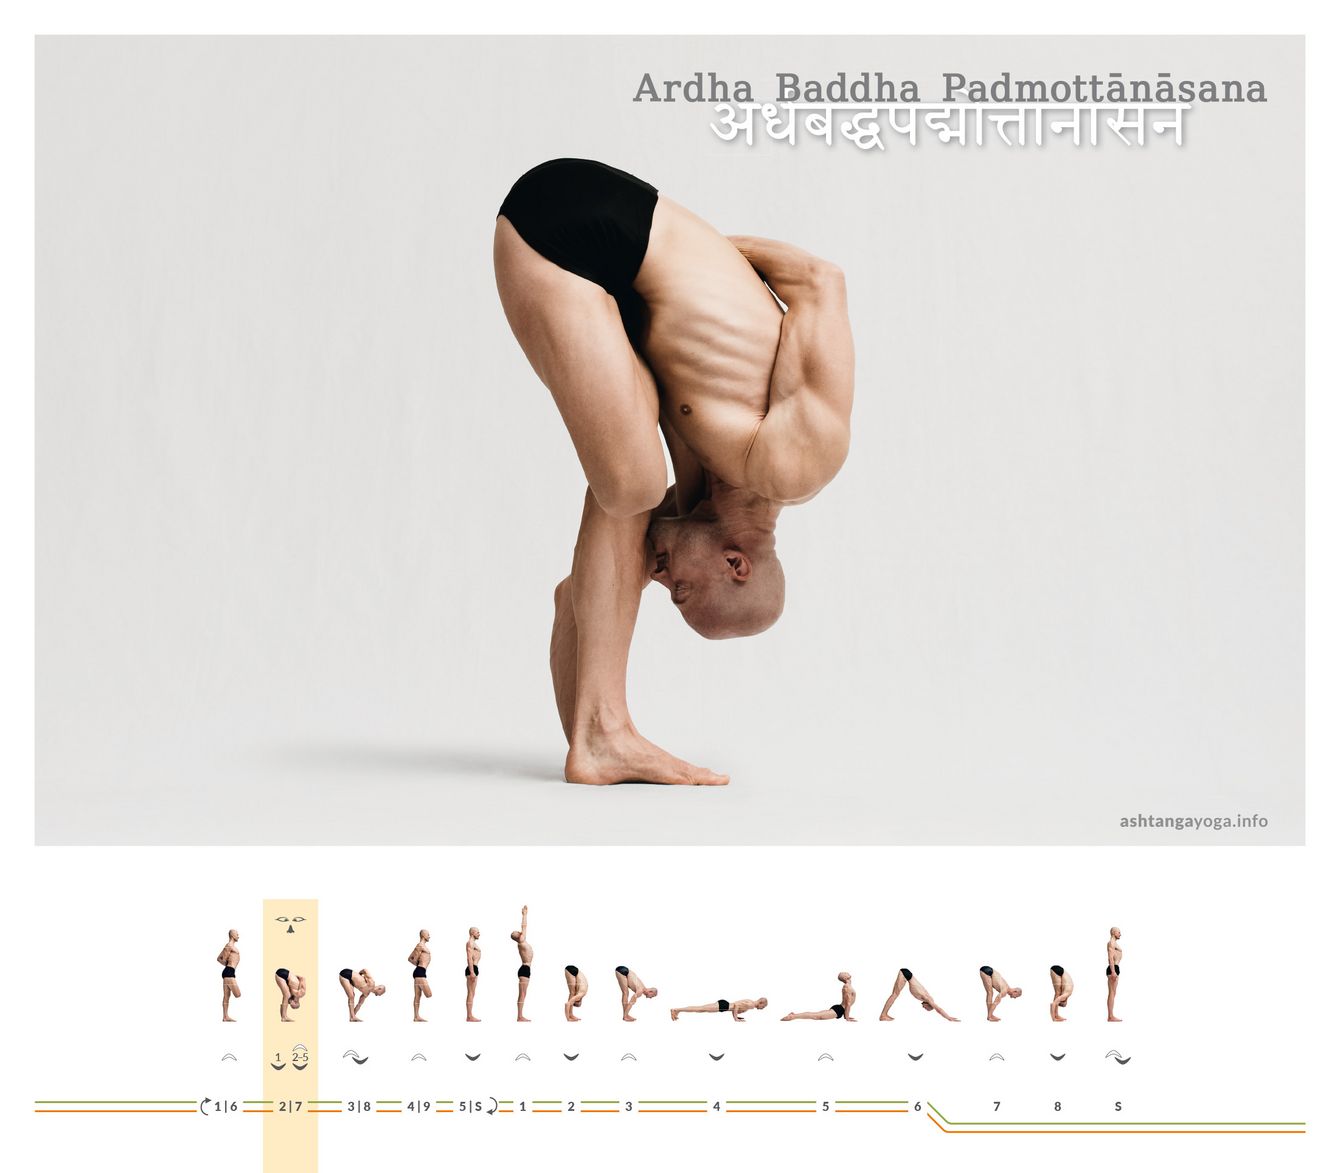 The  "Intense half-bound lotus pose“ is a one-legged standing forward bend with the other leg in the lotus position - Ardha Baddha Padmotanasana.